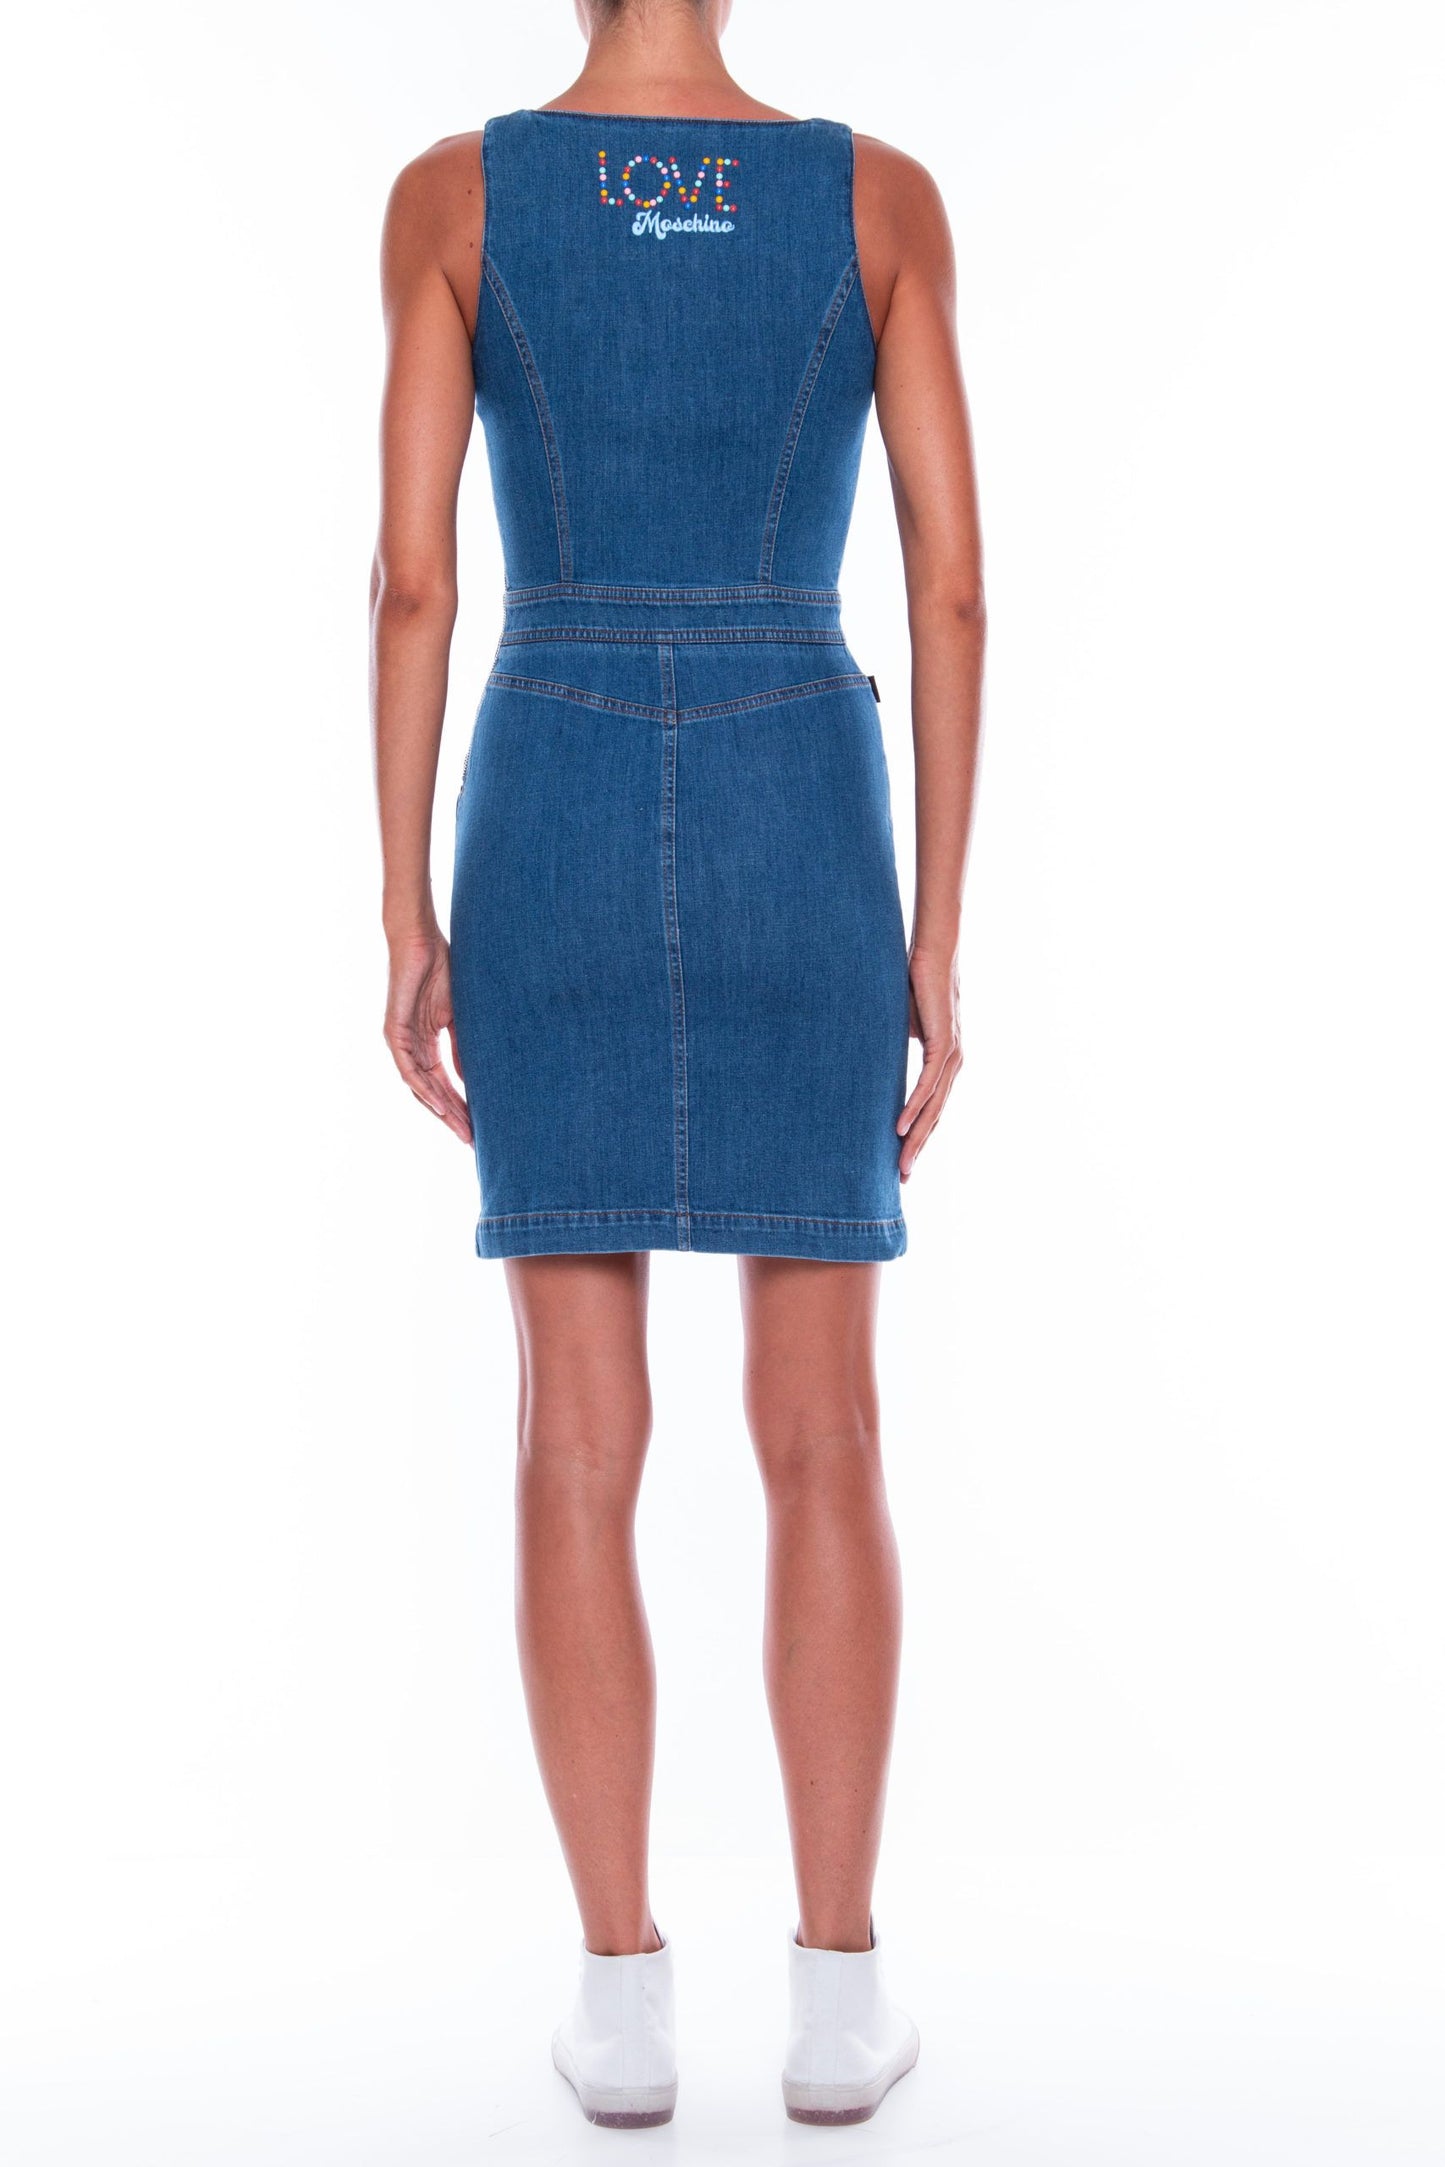 Chic Sleeveless Denim Dress with Colored Buttons